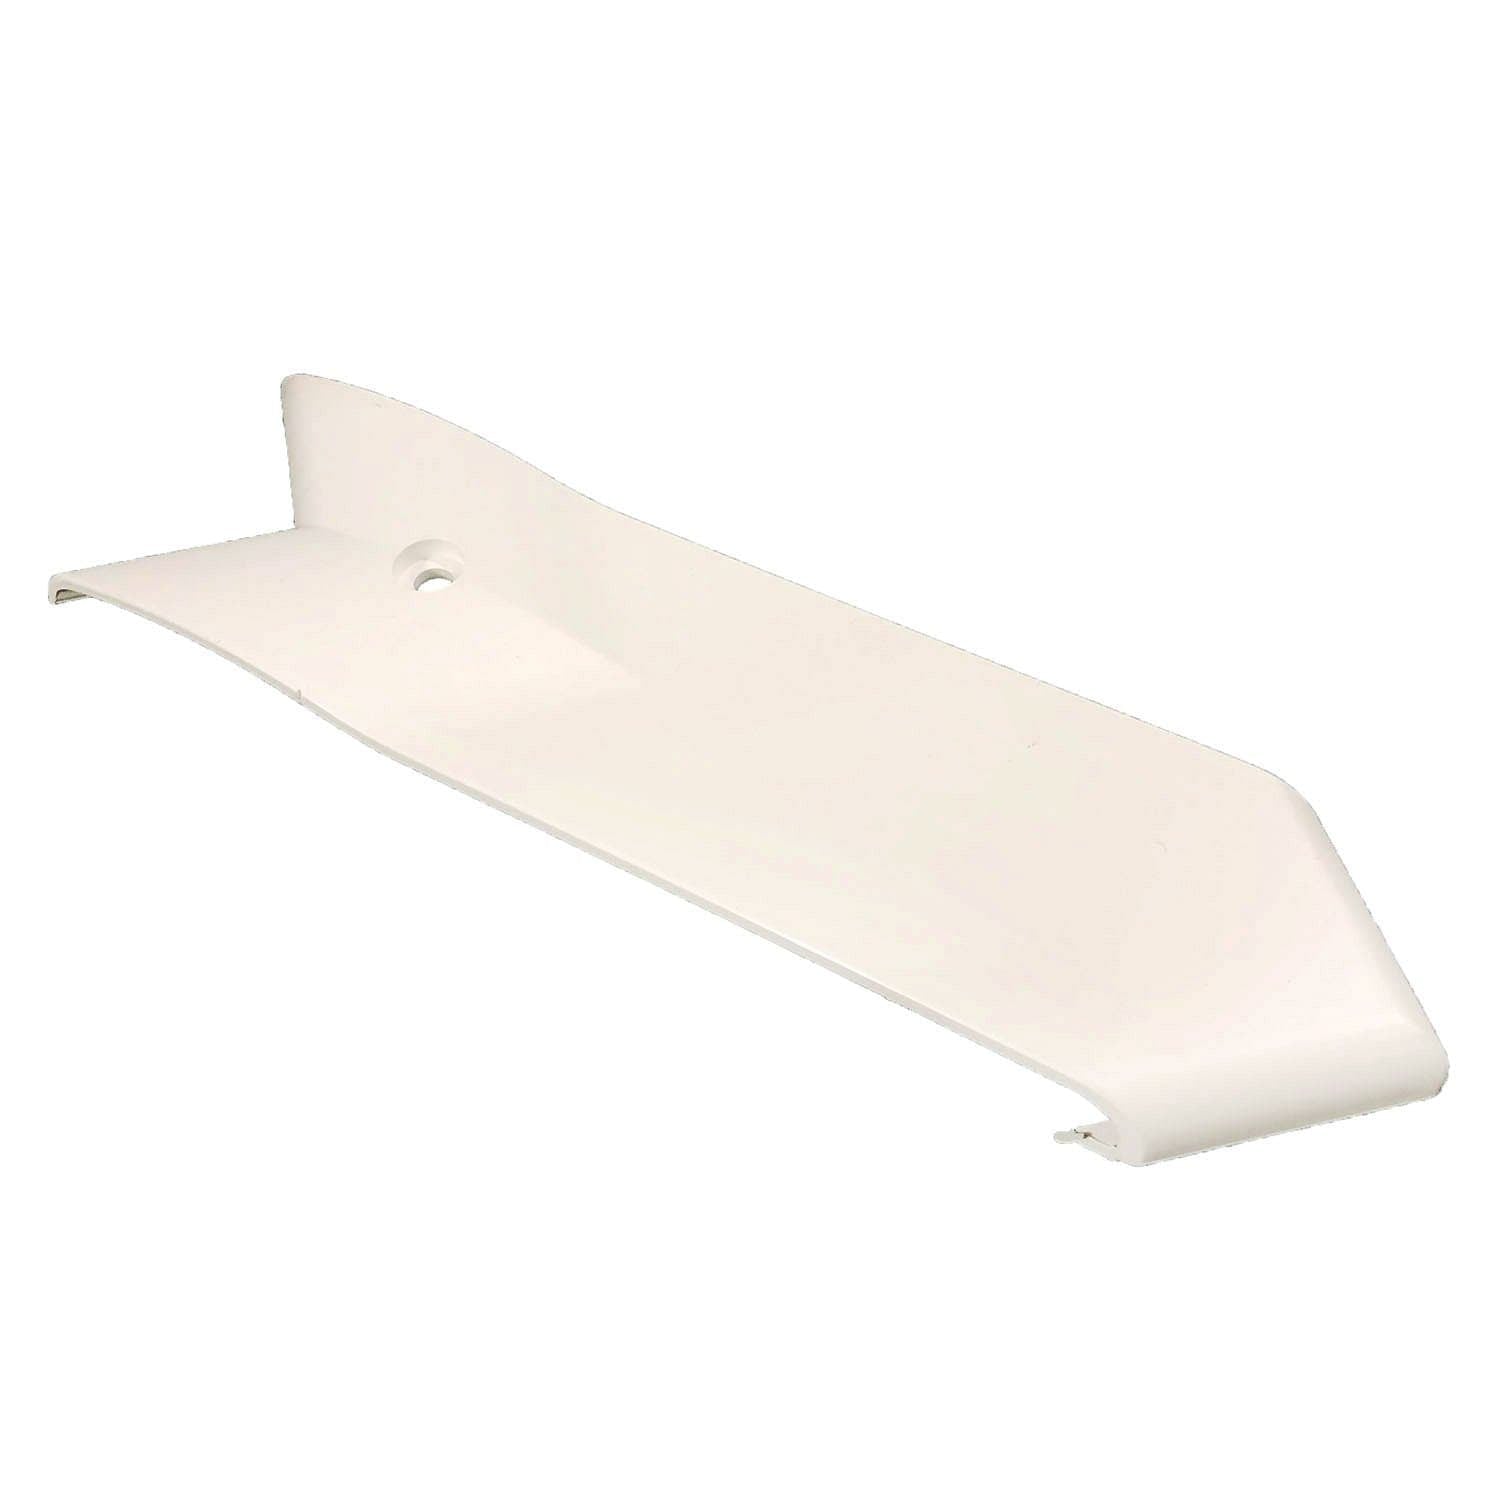 Thetford 94290 (601-022-94290) B&B Molders 4" Straight Corner Slide-Out Extrusion Cover, White